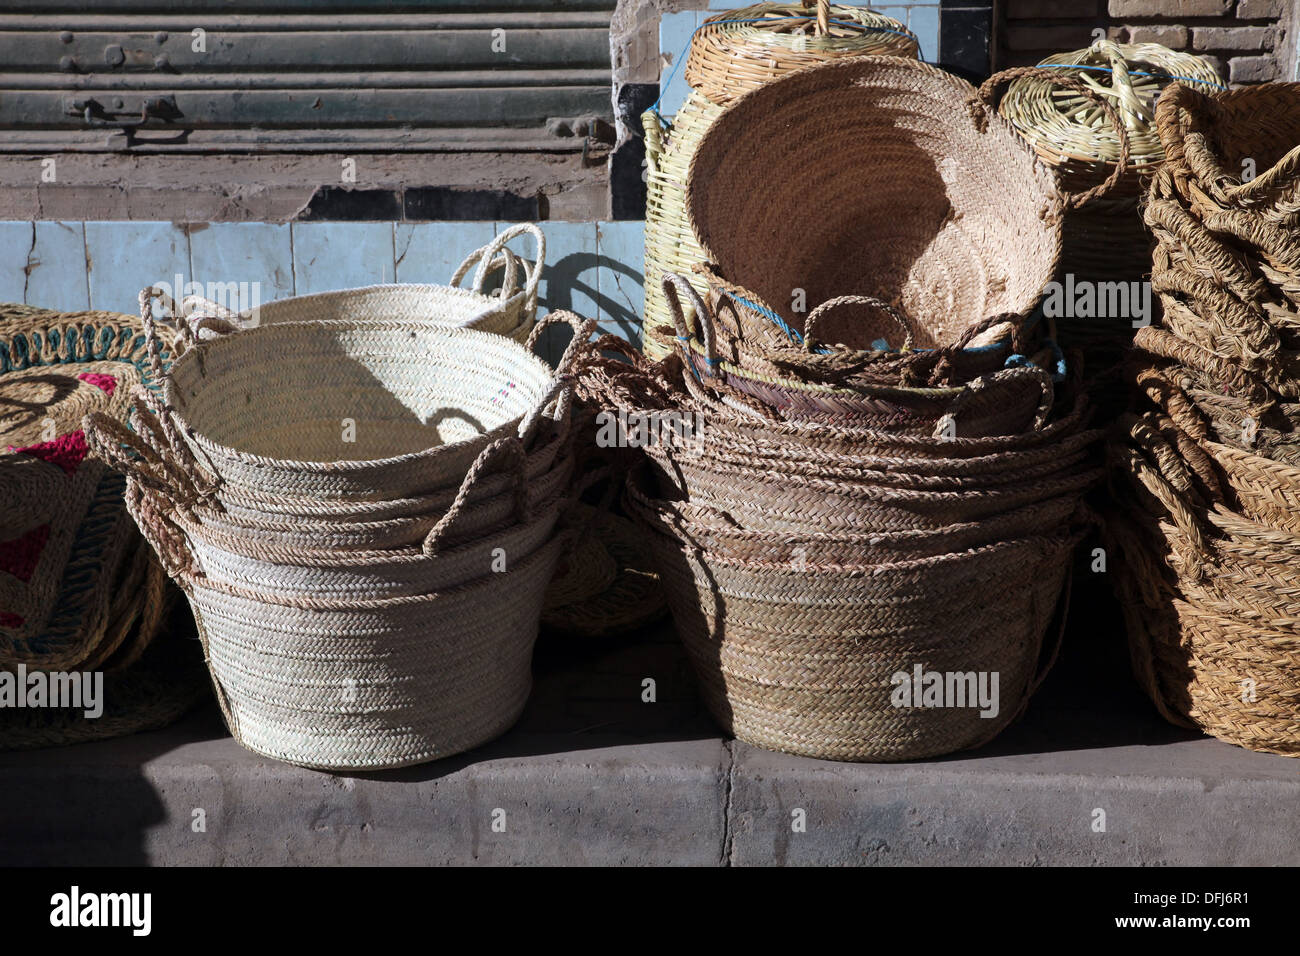 Hand made basketry Stock Photo